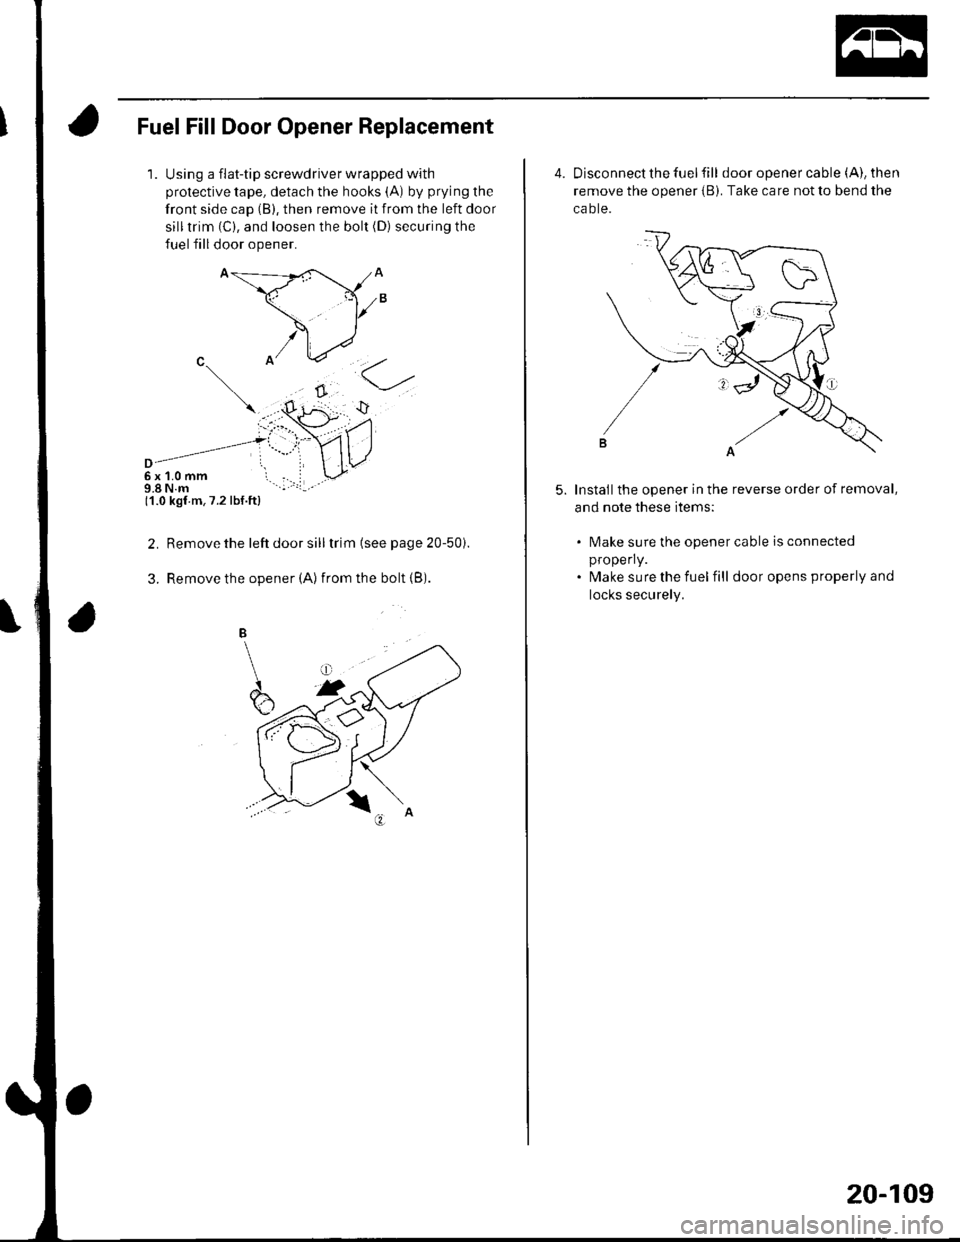 HONDA CIVIC 2003 7.G Owners Guide Fuel Fill Door Opener Replacement
1.Using a flat-tip screwdriver wrapped with
protective tape, detach the hooks (A) by prying the
front side cap (B), then remove it from the left door
silltrim (C), an